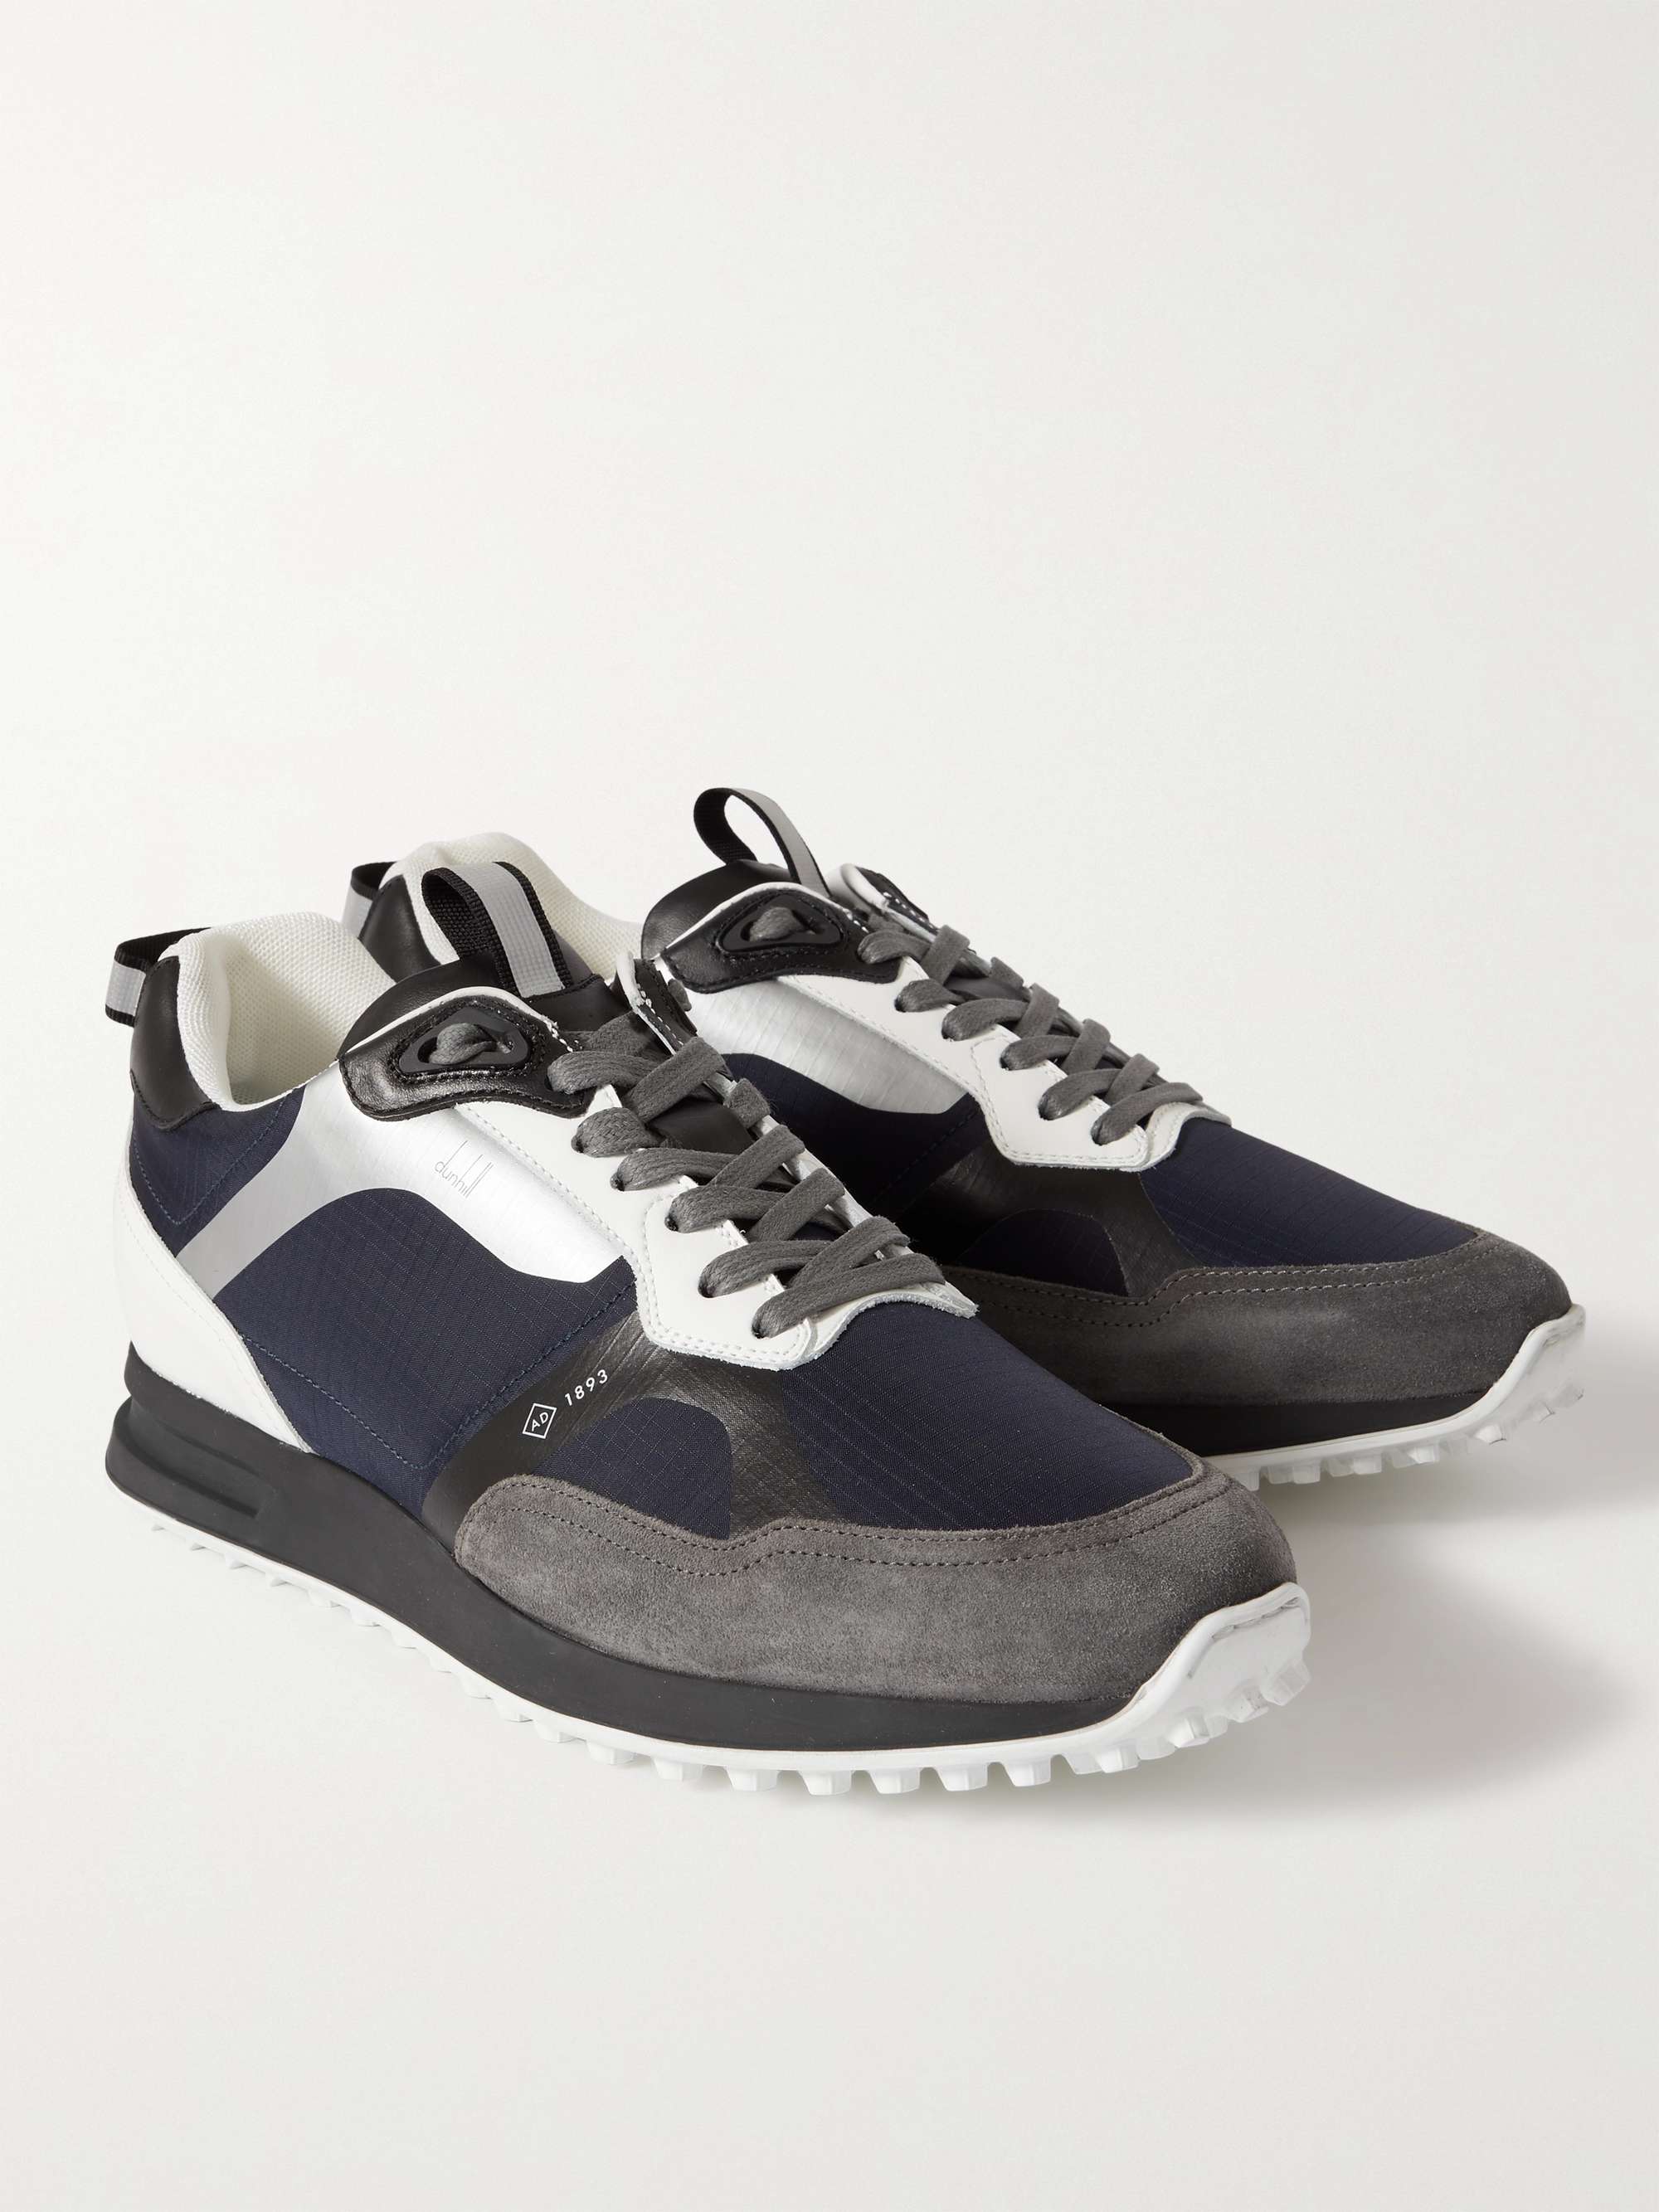 DUNHILL Radial 2.0 Leather and Suede-Trimmed Ripstop Sneakers